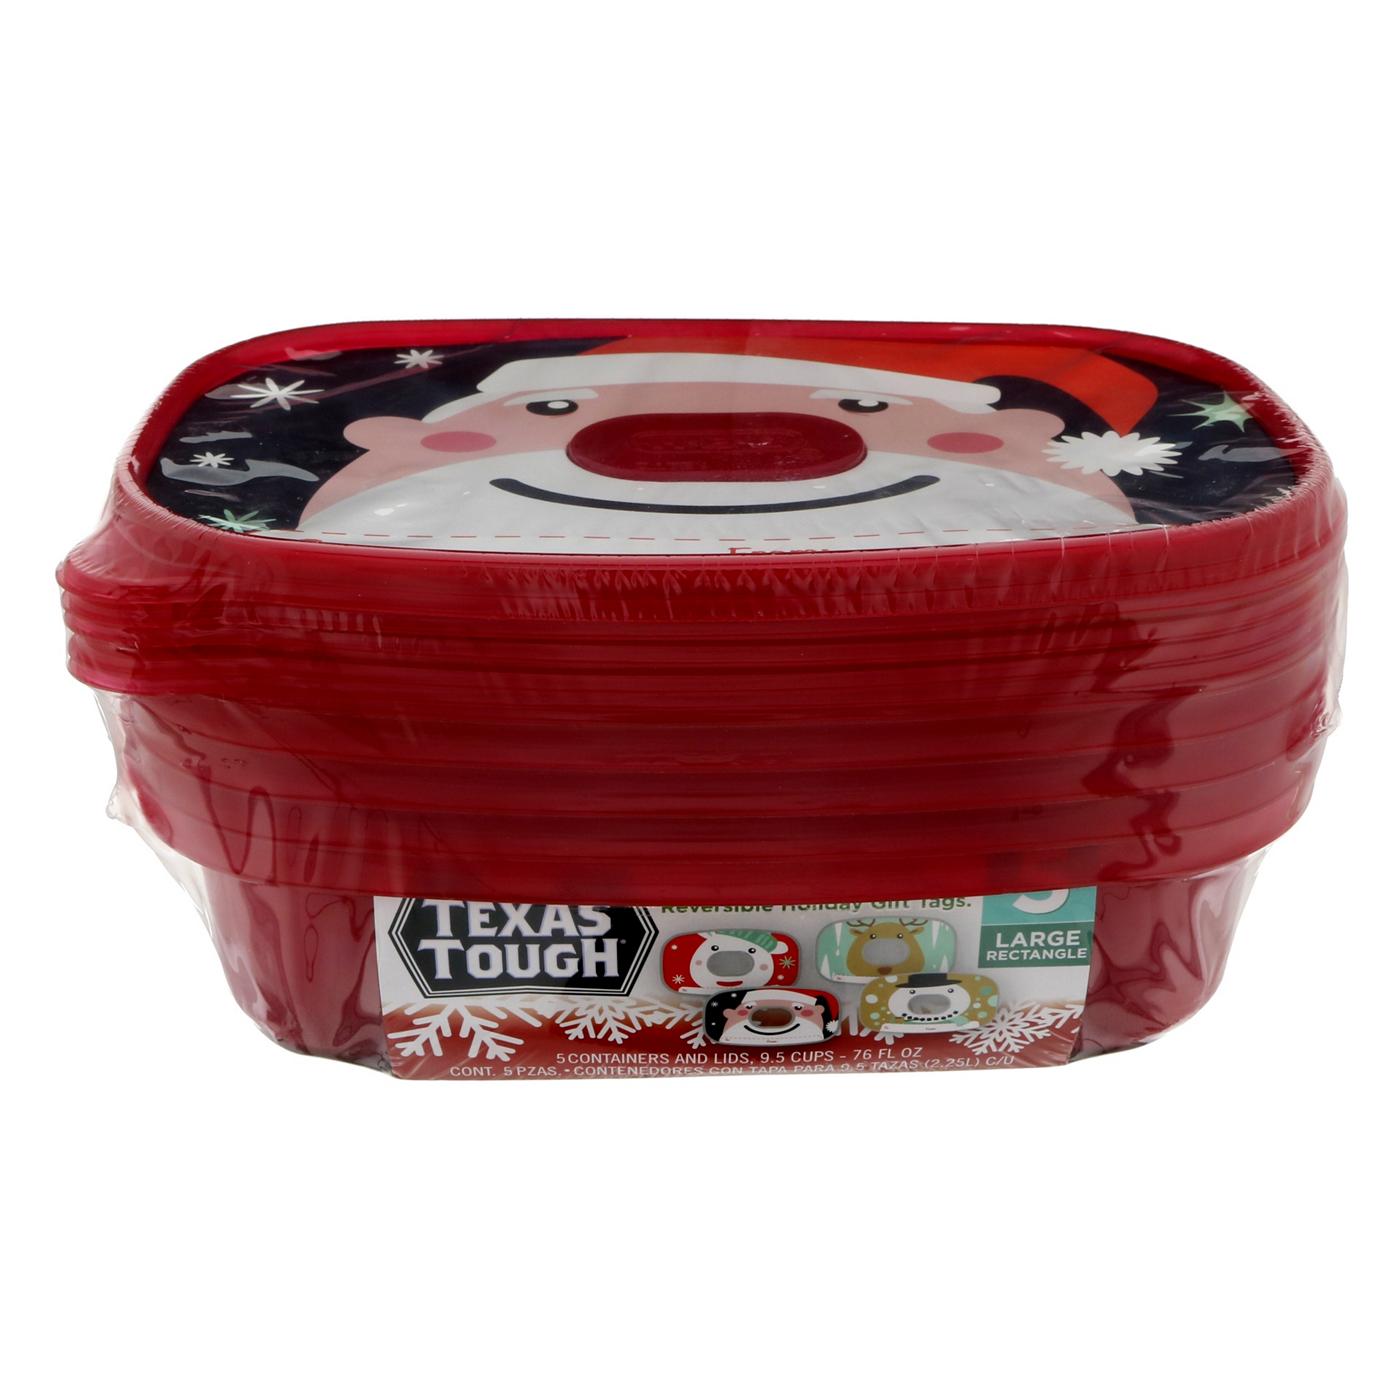 2 Litre Rectangular Ice Cream tub with Lid/Food Storage container